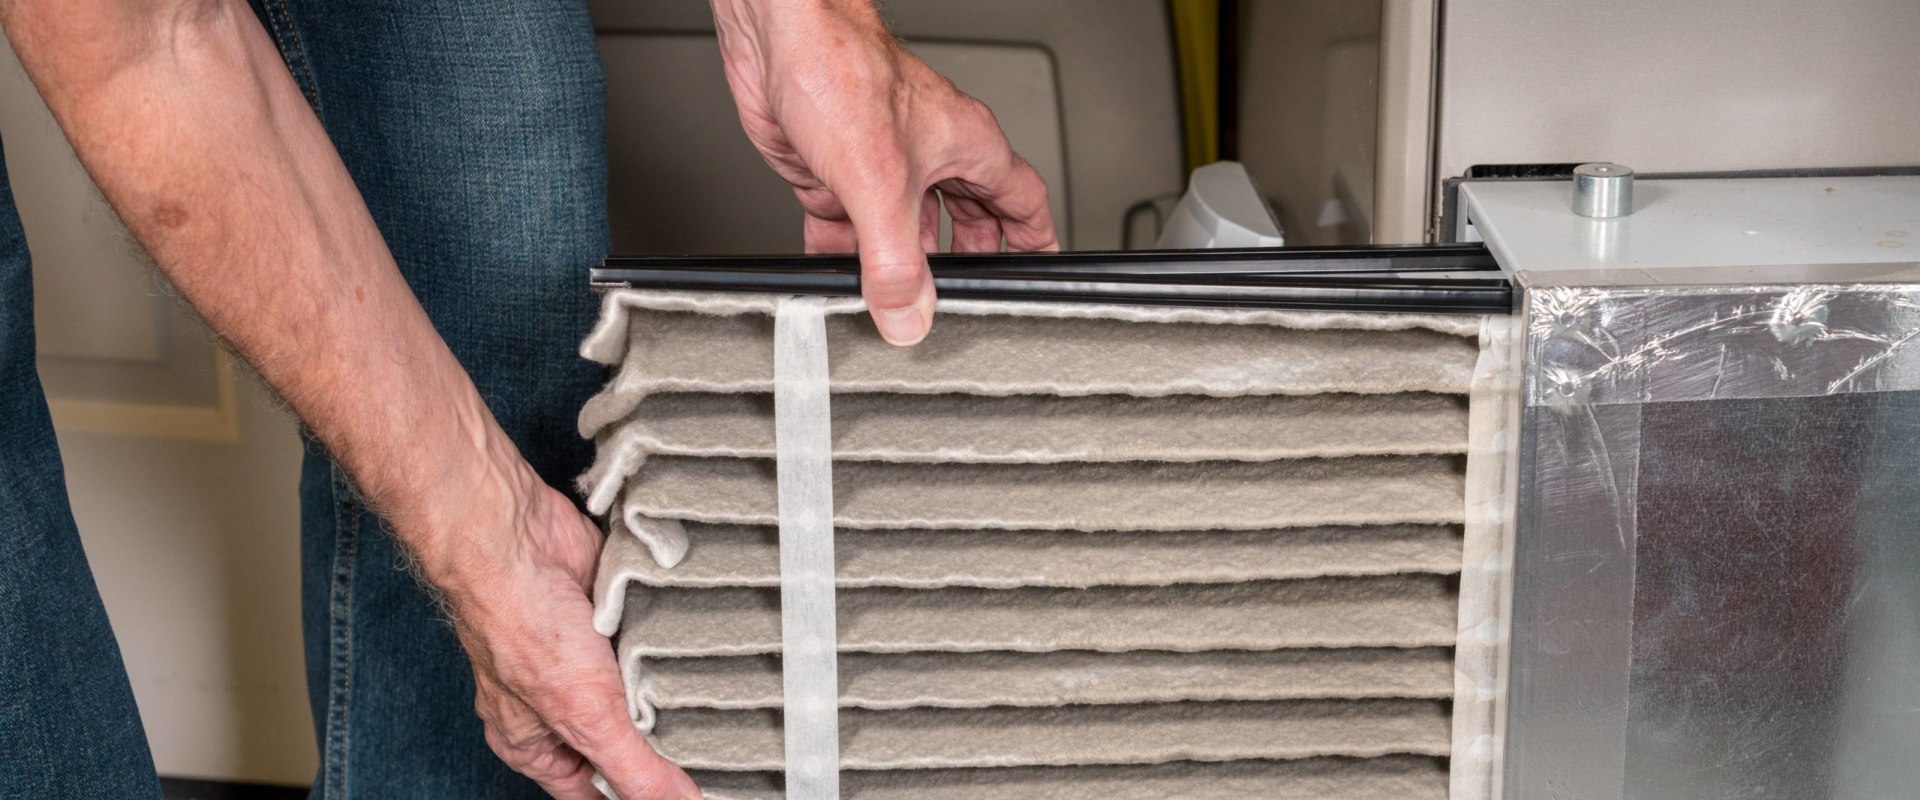 What is the Largest Furnace Filter Size Available?